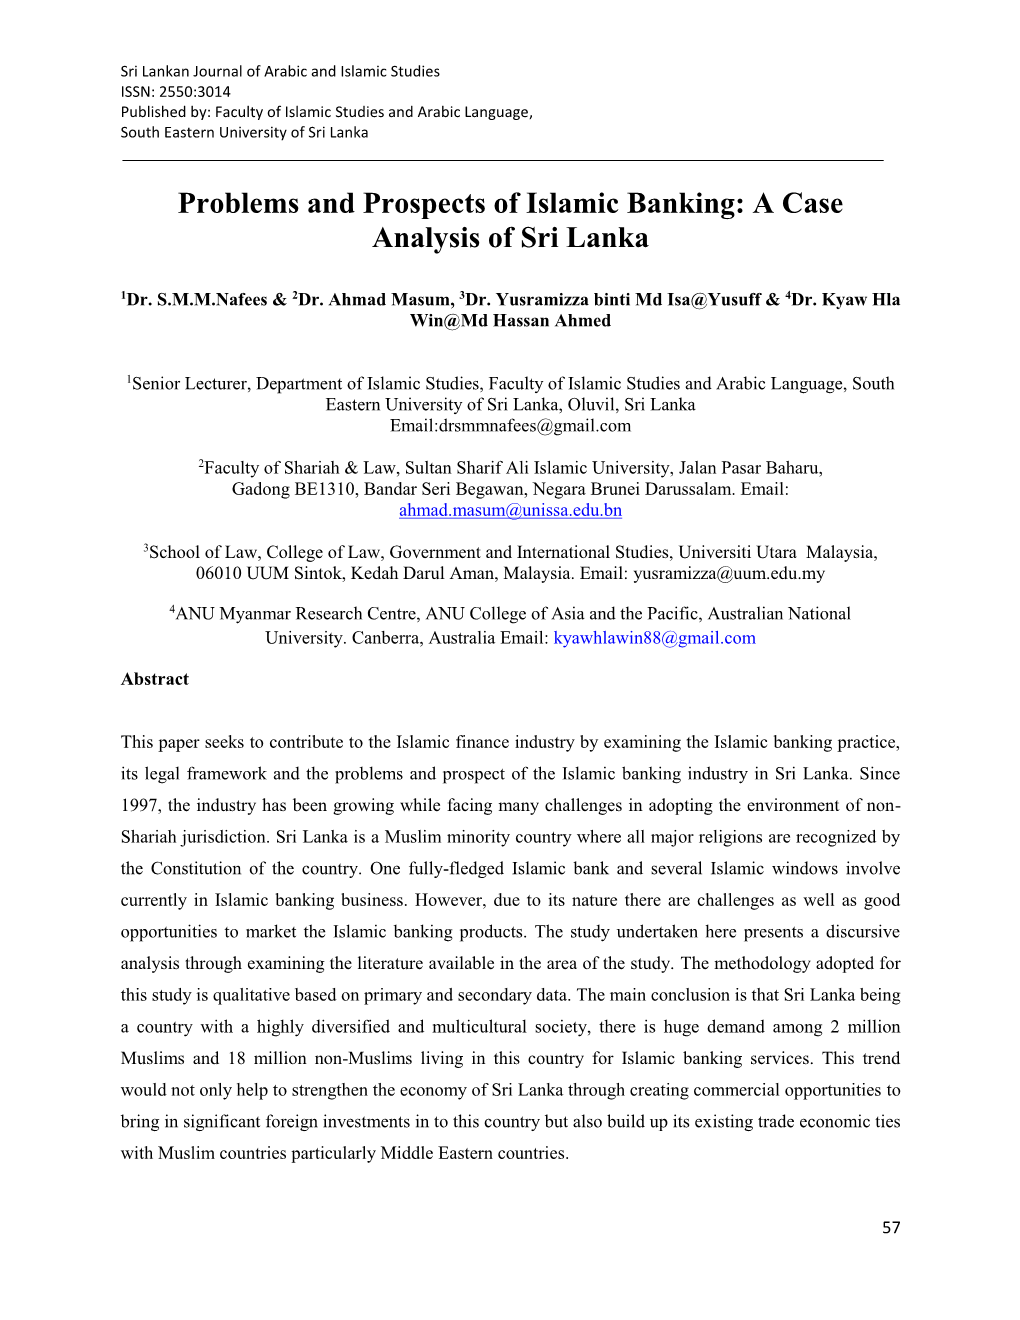 Problems and Prospects of Islamic Banking: a Case Analysis of Sri Lanka